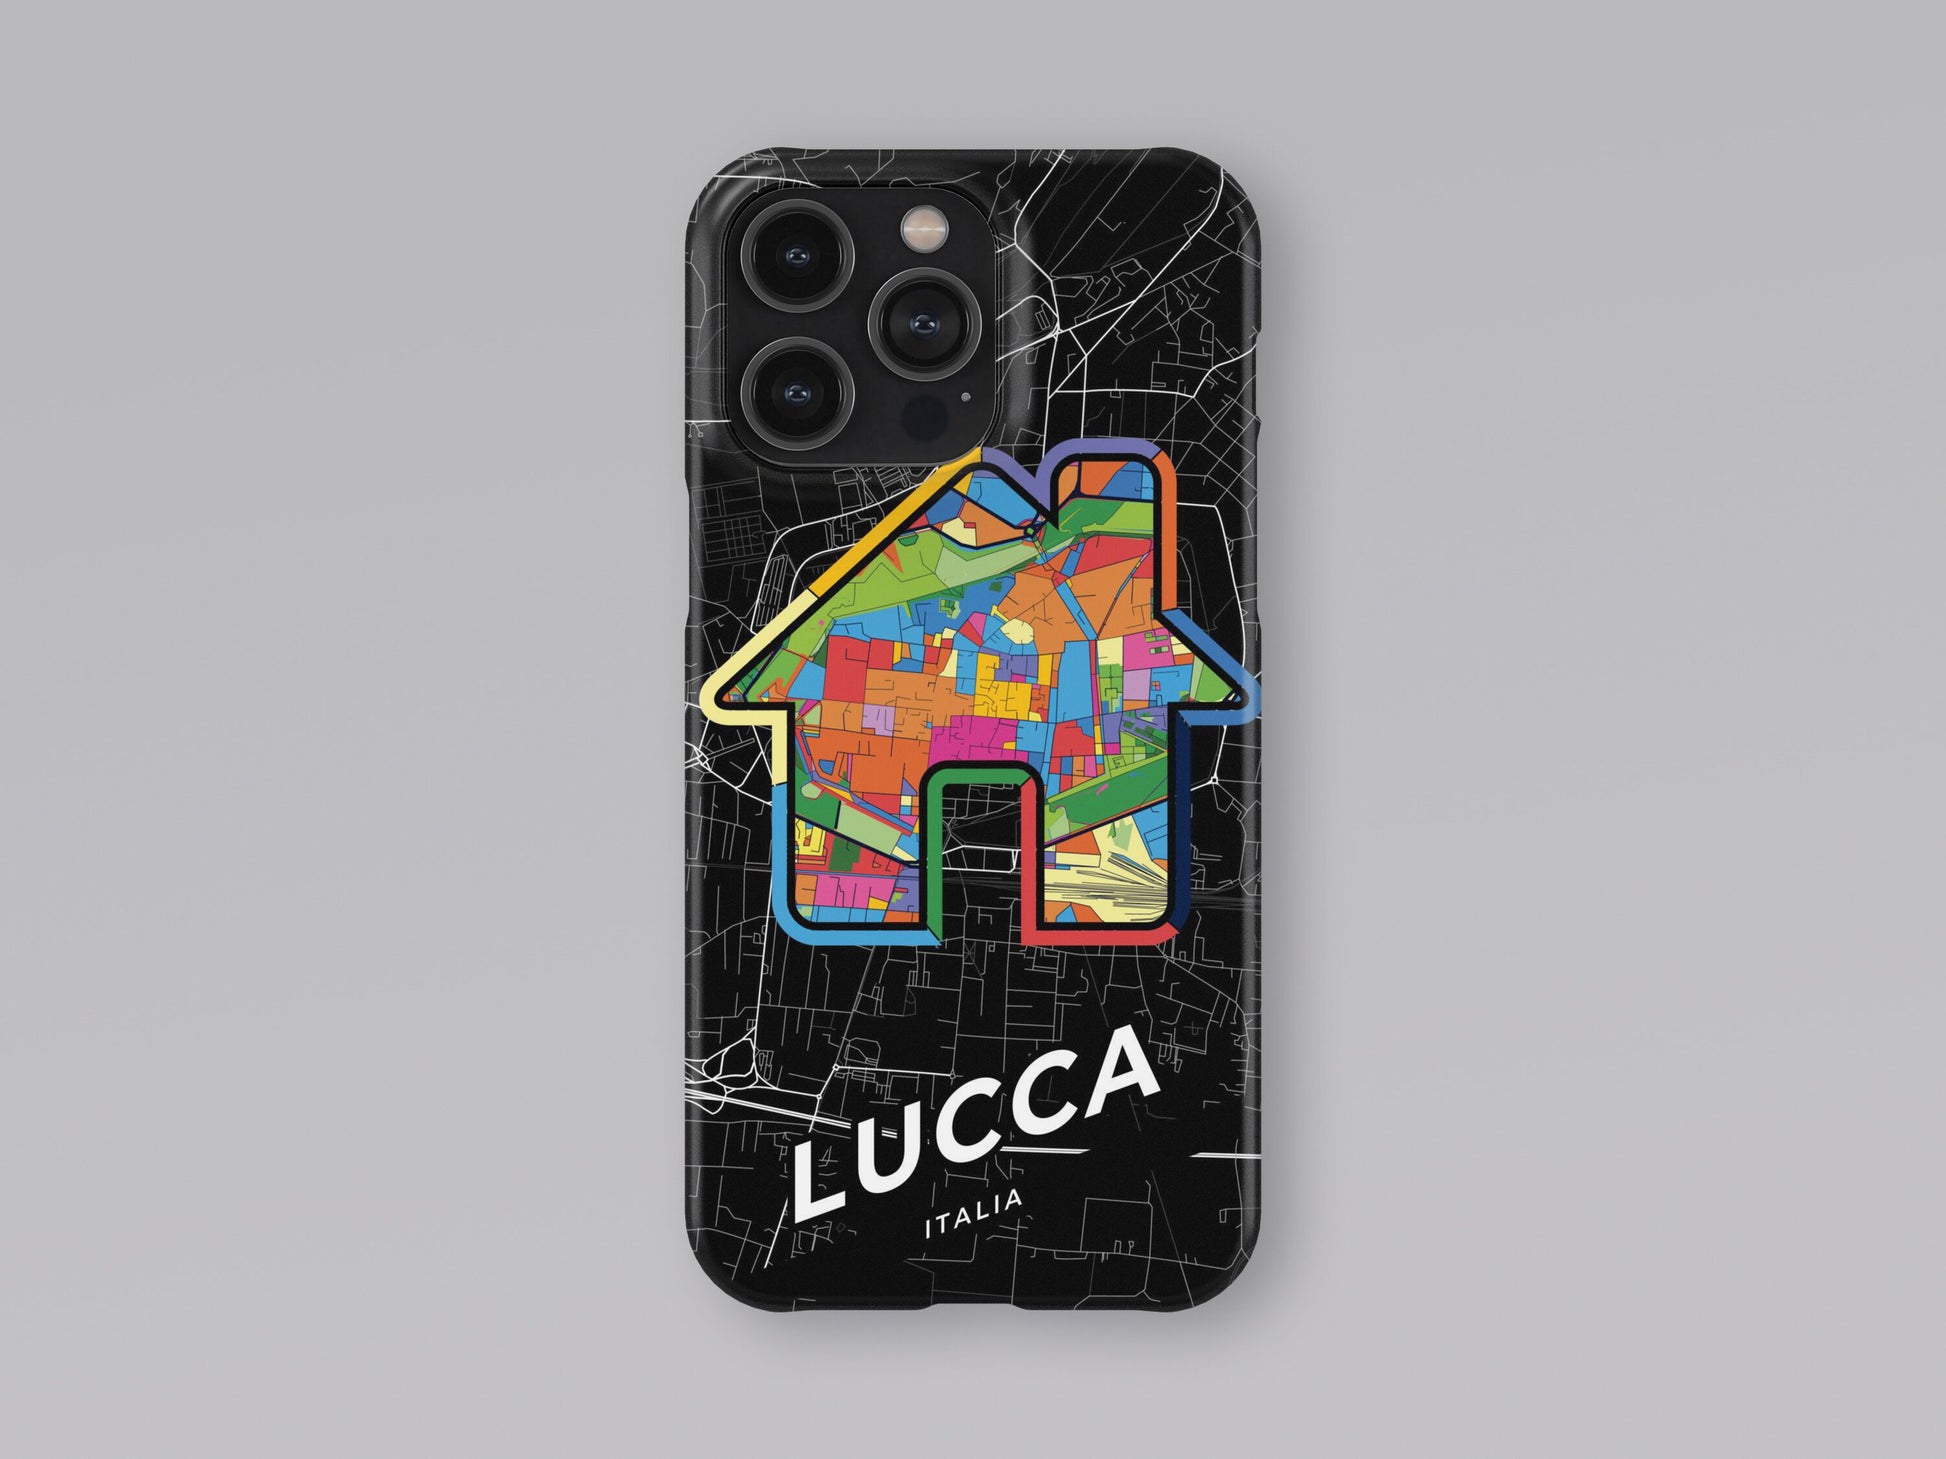 Lucca Italy slim phone case with colorful icon. Birthday, wedding or housewarming gift. Couple match cases. 3